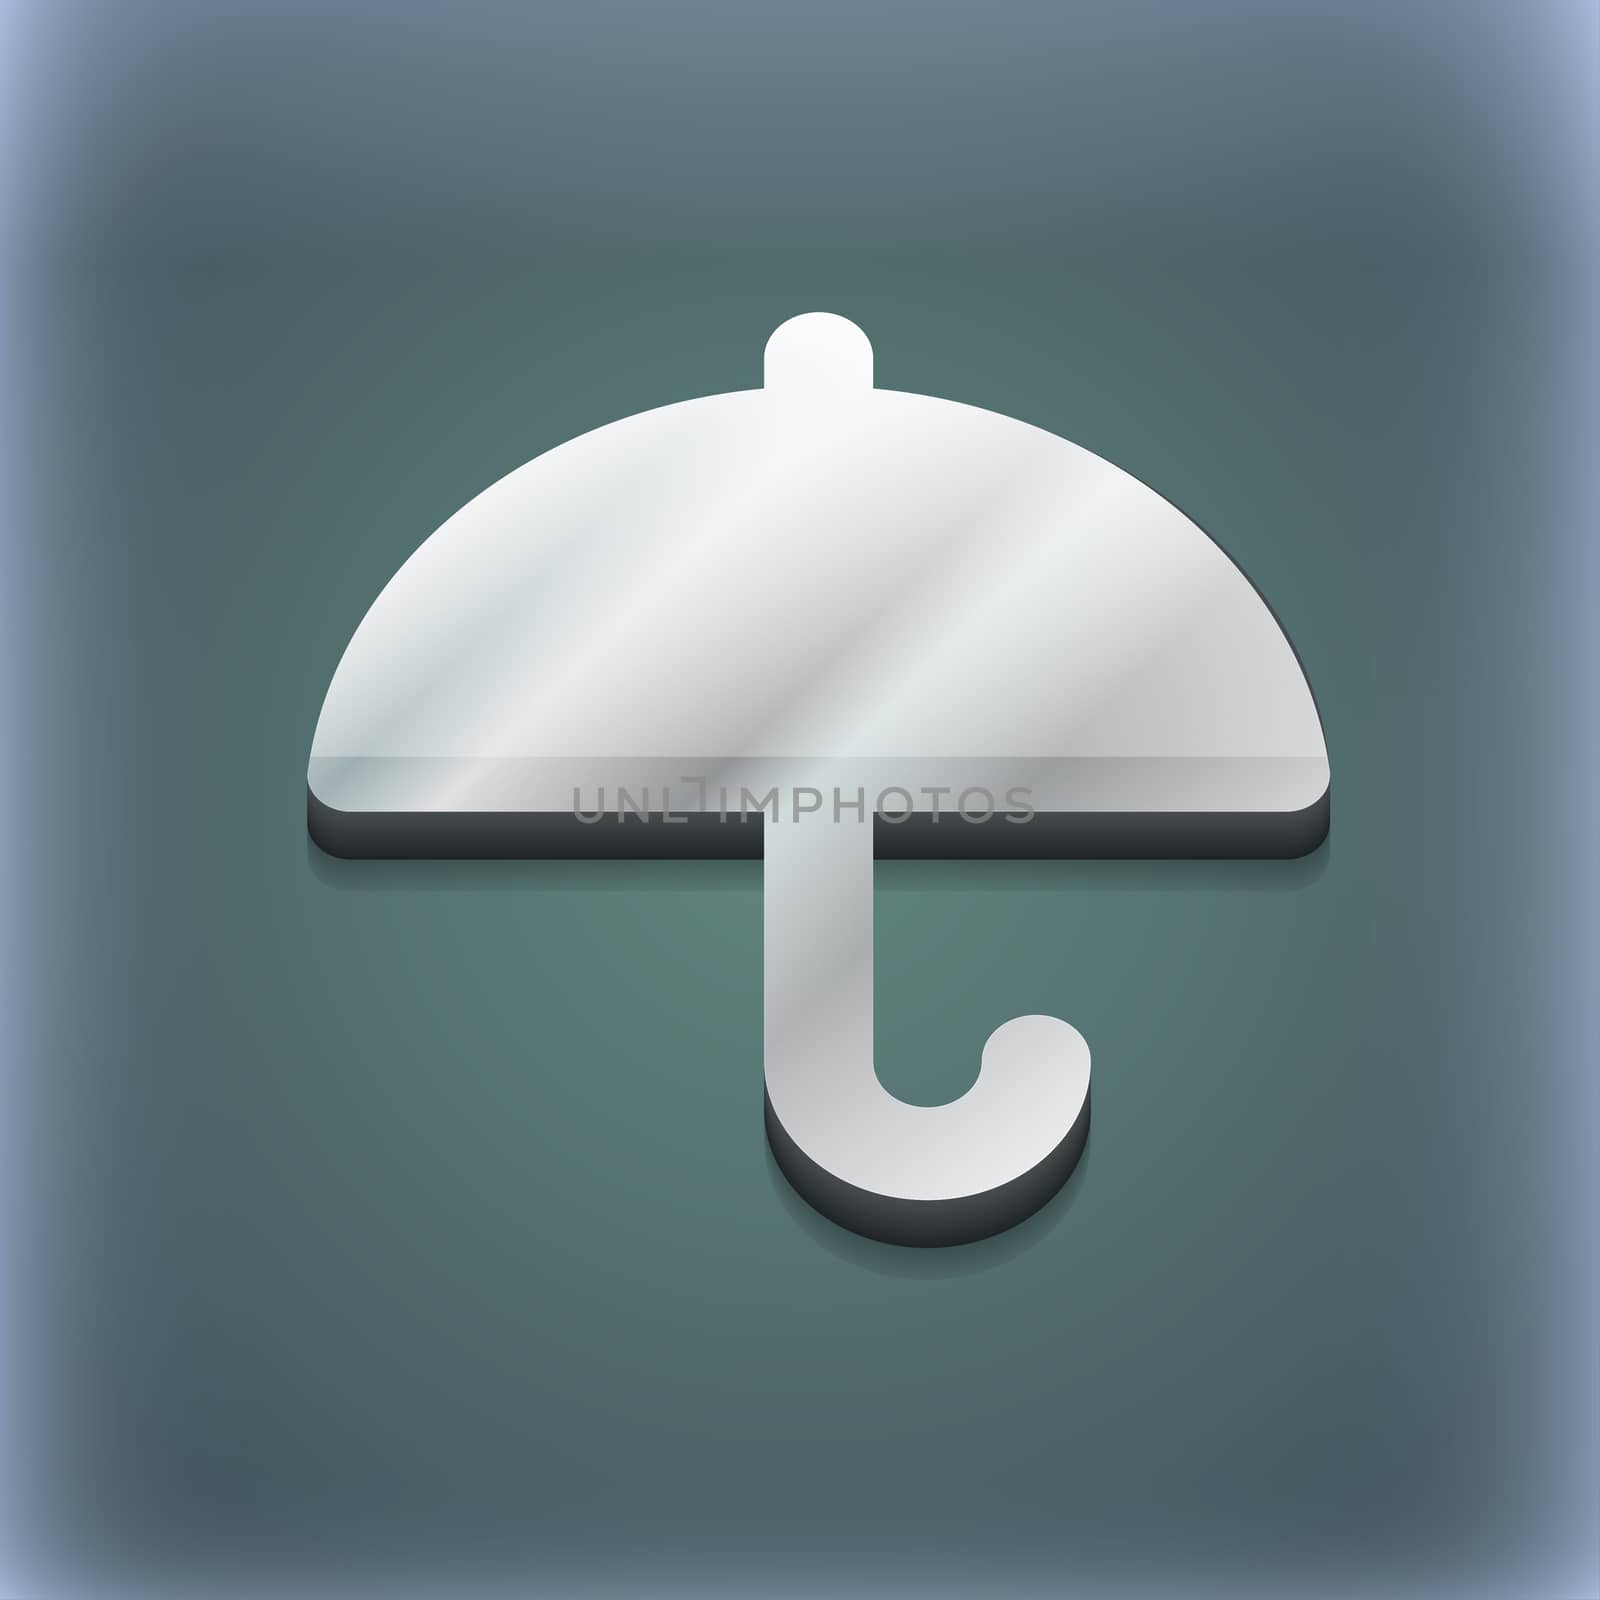 Umbrella icon symbol. 3D style. Trendy, modern design with space for your text illustration. Raster version